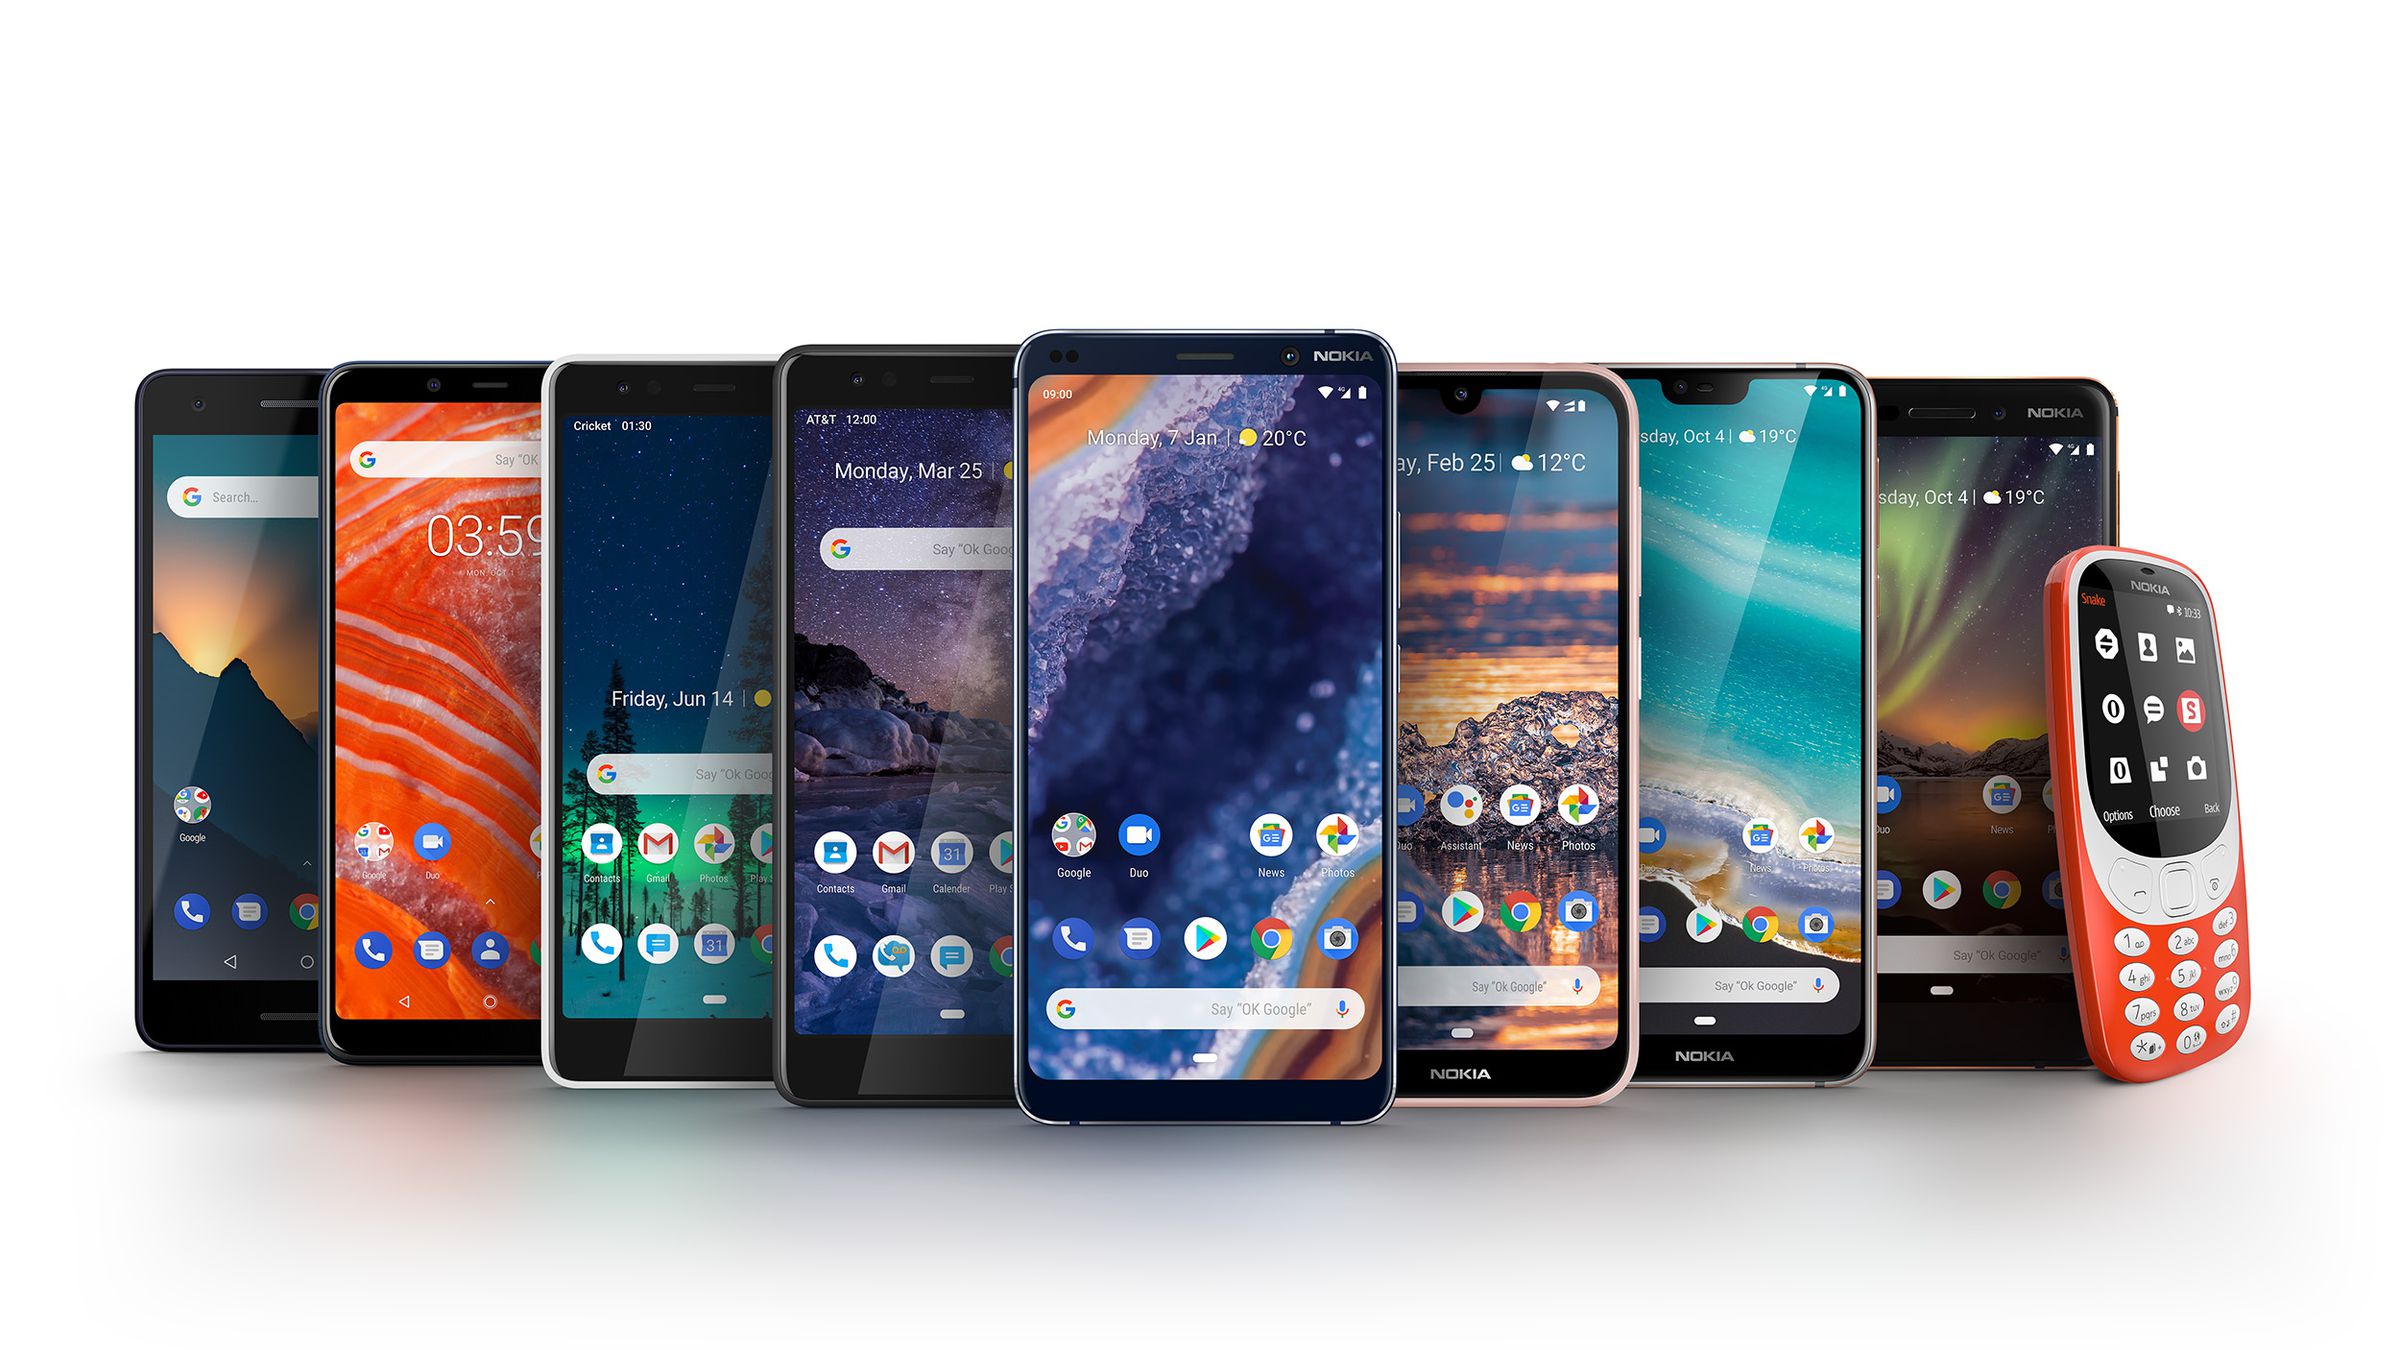 Nokia’s range of devices available in the US. The first four models are carrier devices, the remaining five are sold unlocked.